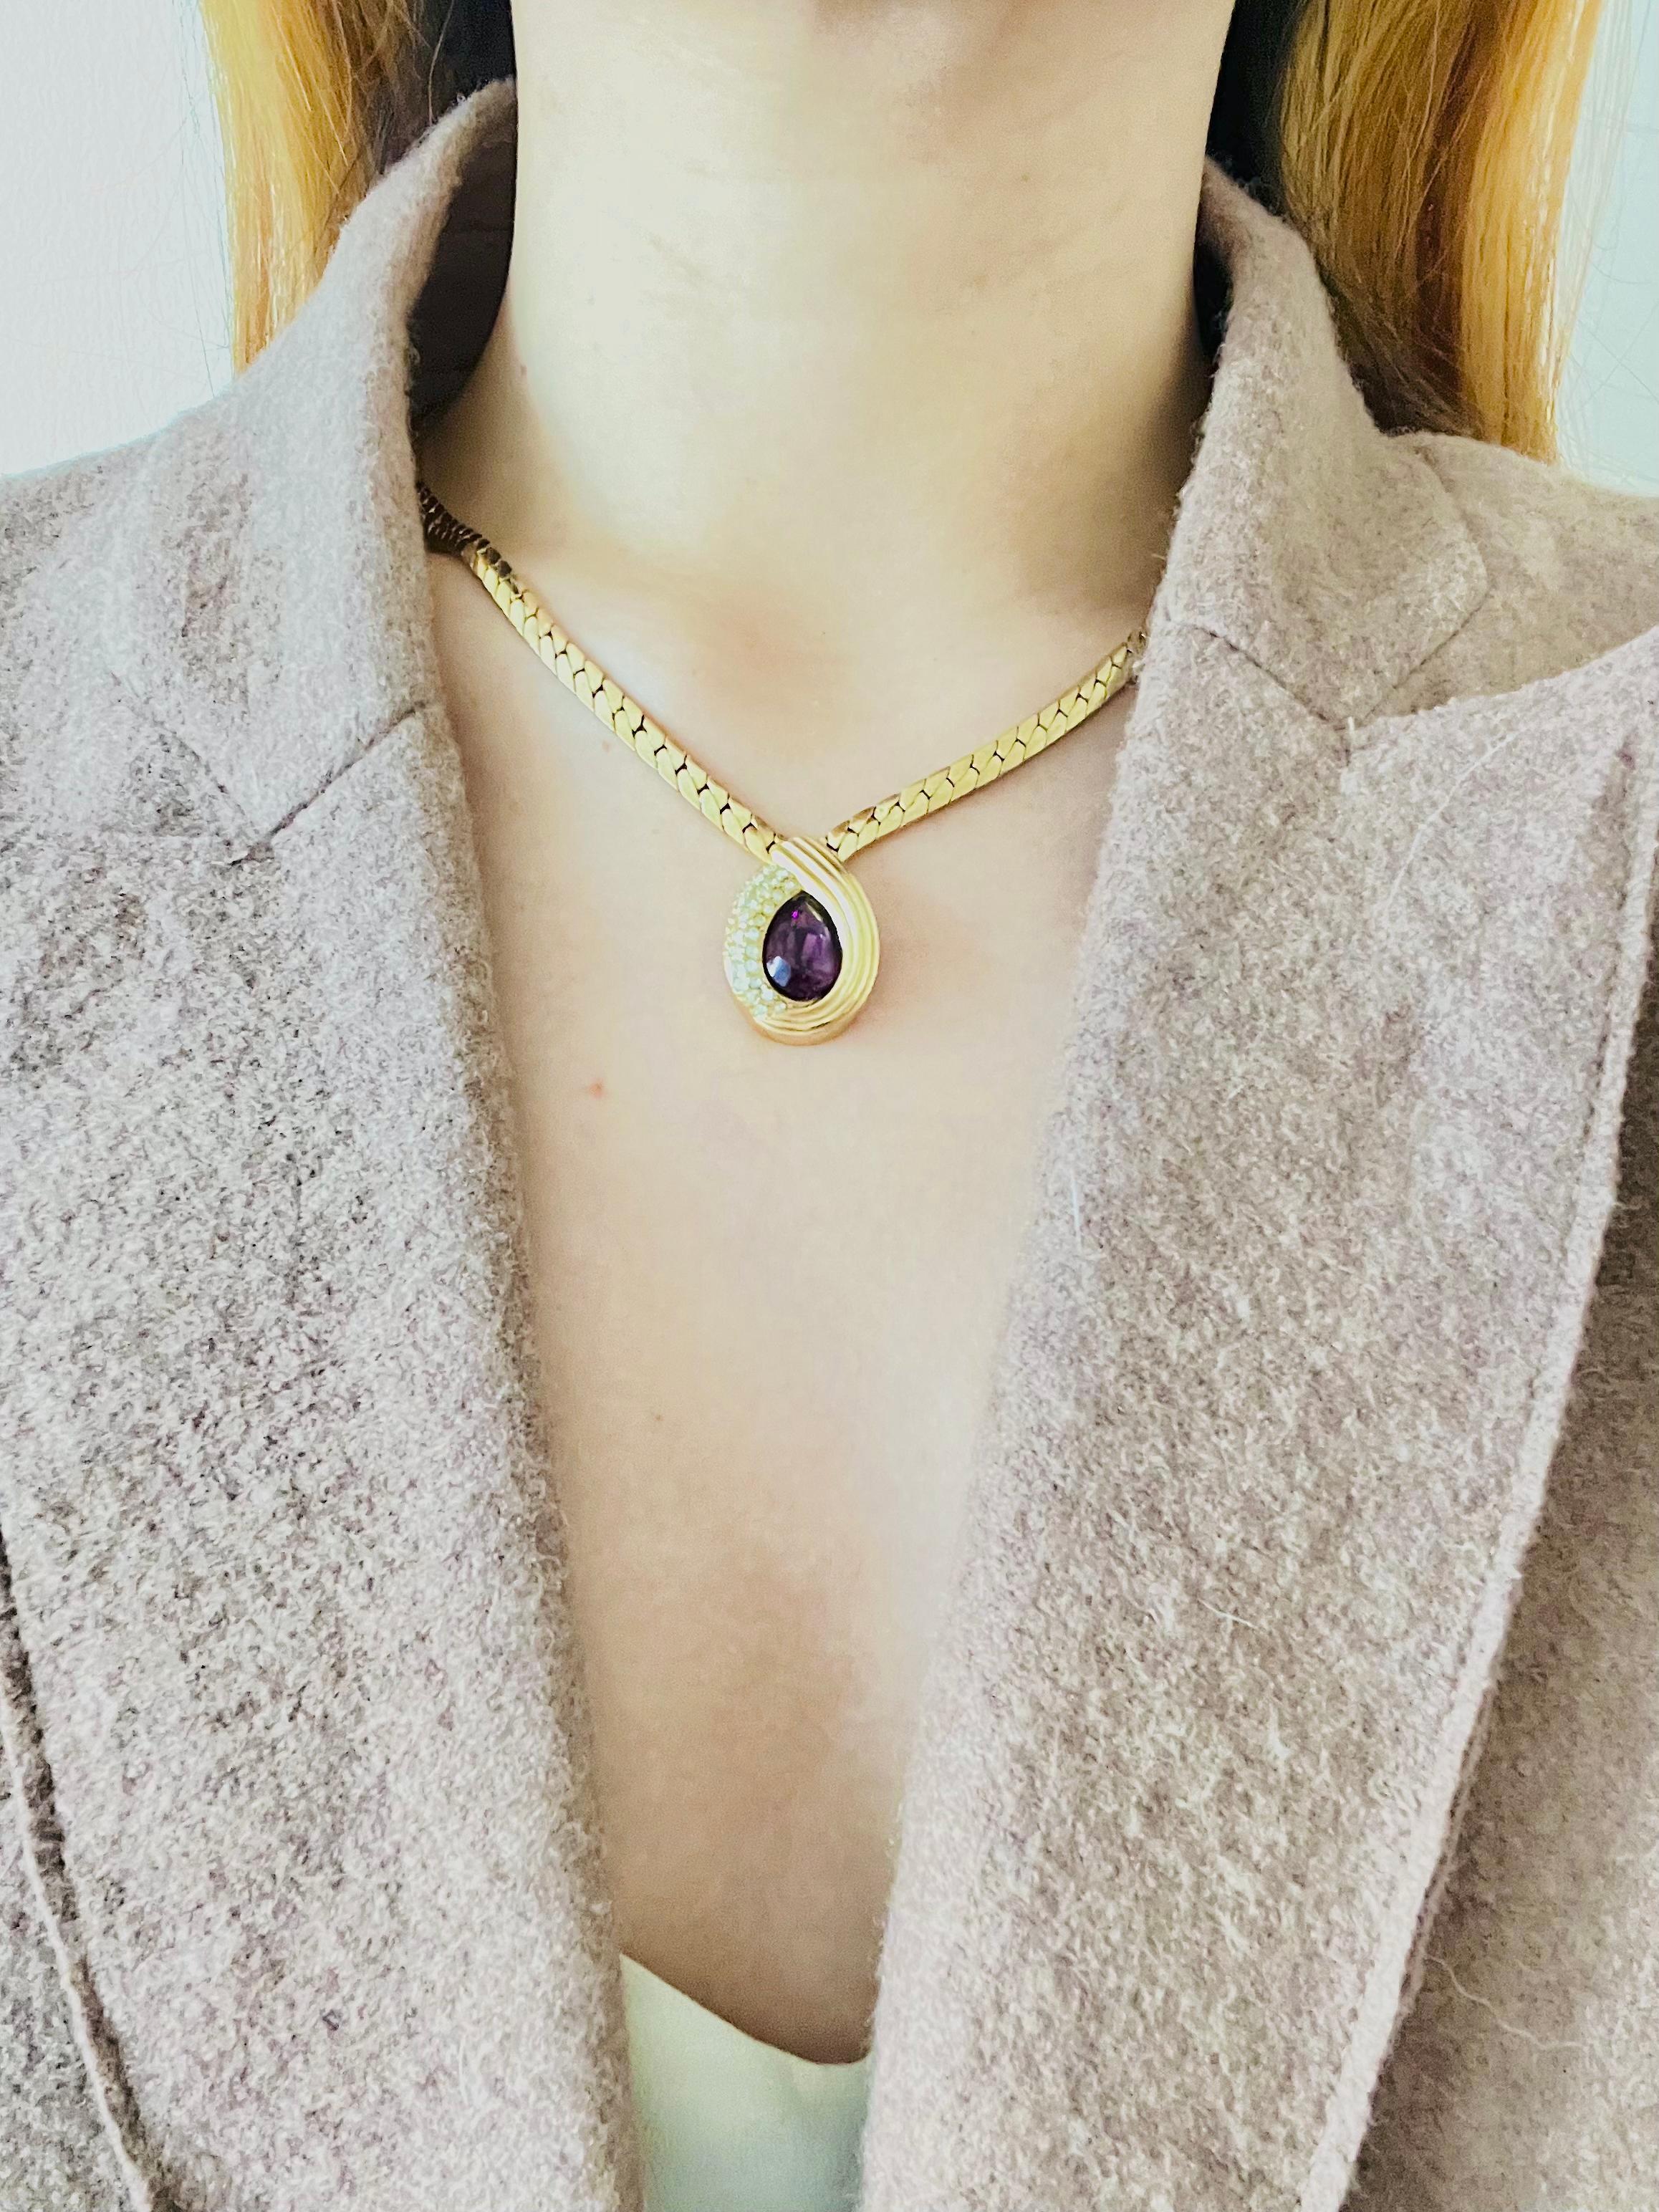 Christian Dior Vintage 1980s Purple Crystal Amethyst Tear Drop Pendant Necklace In Good Condition For Sale In Wokingham, England